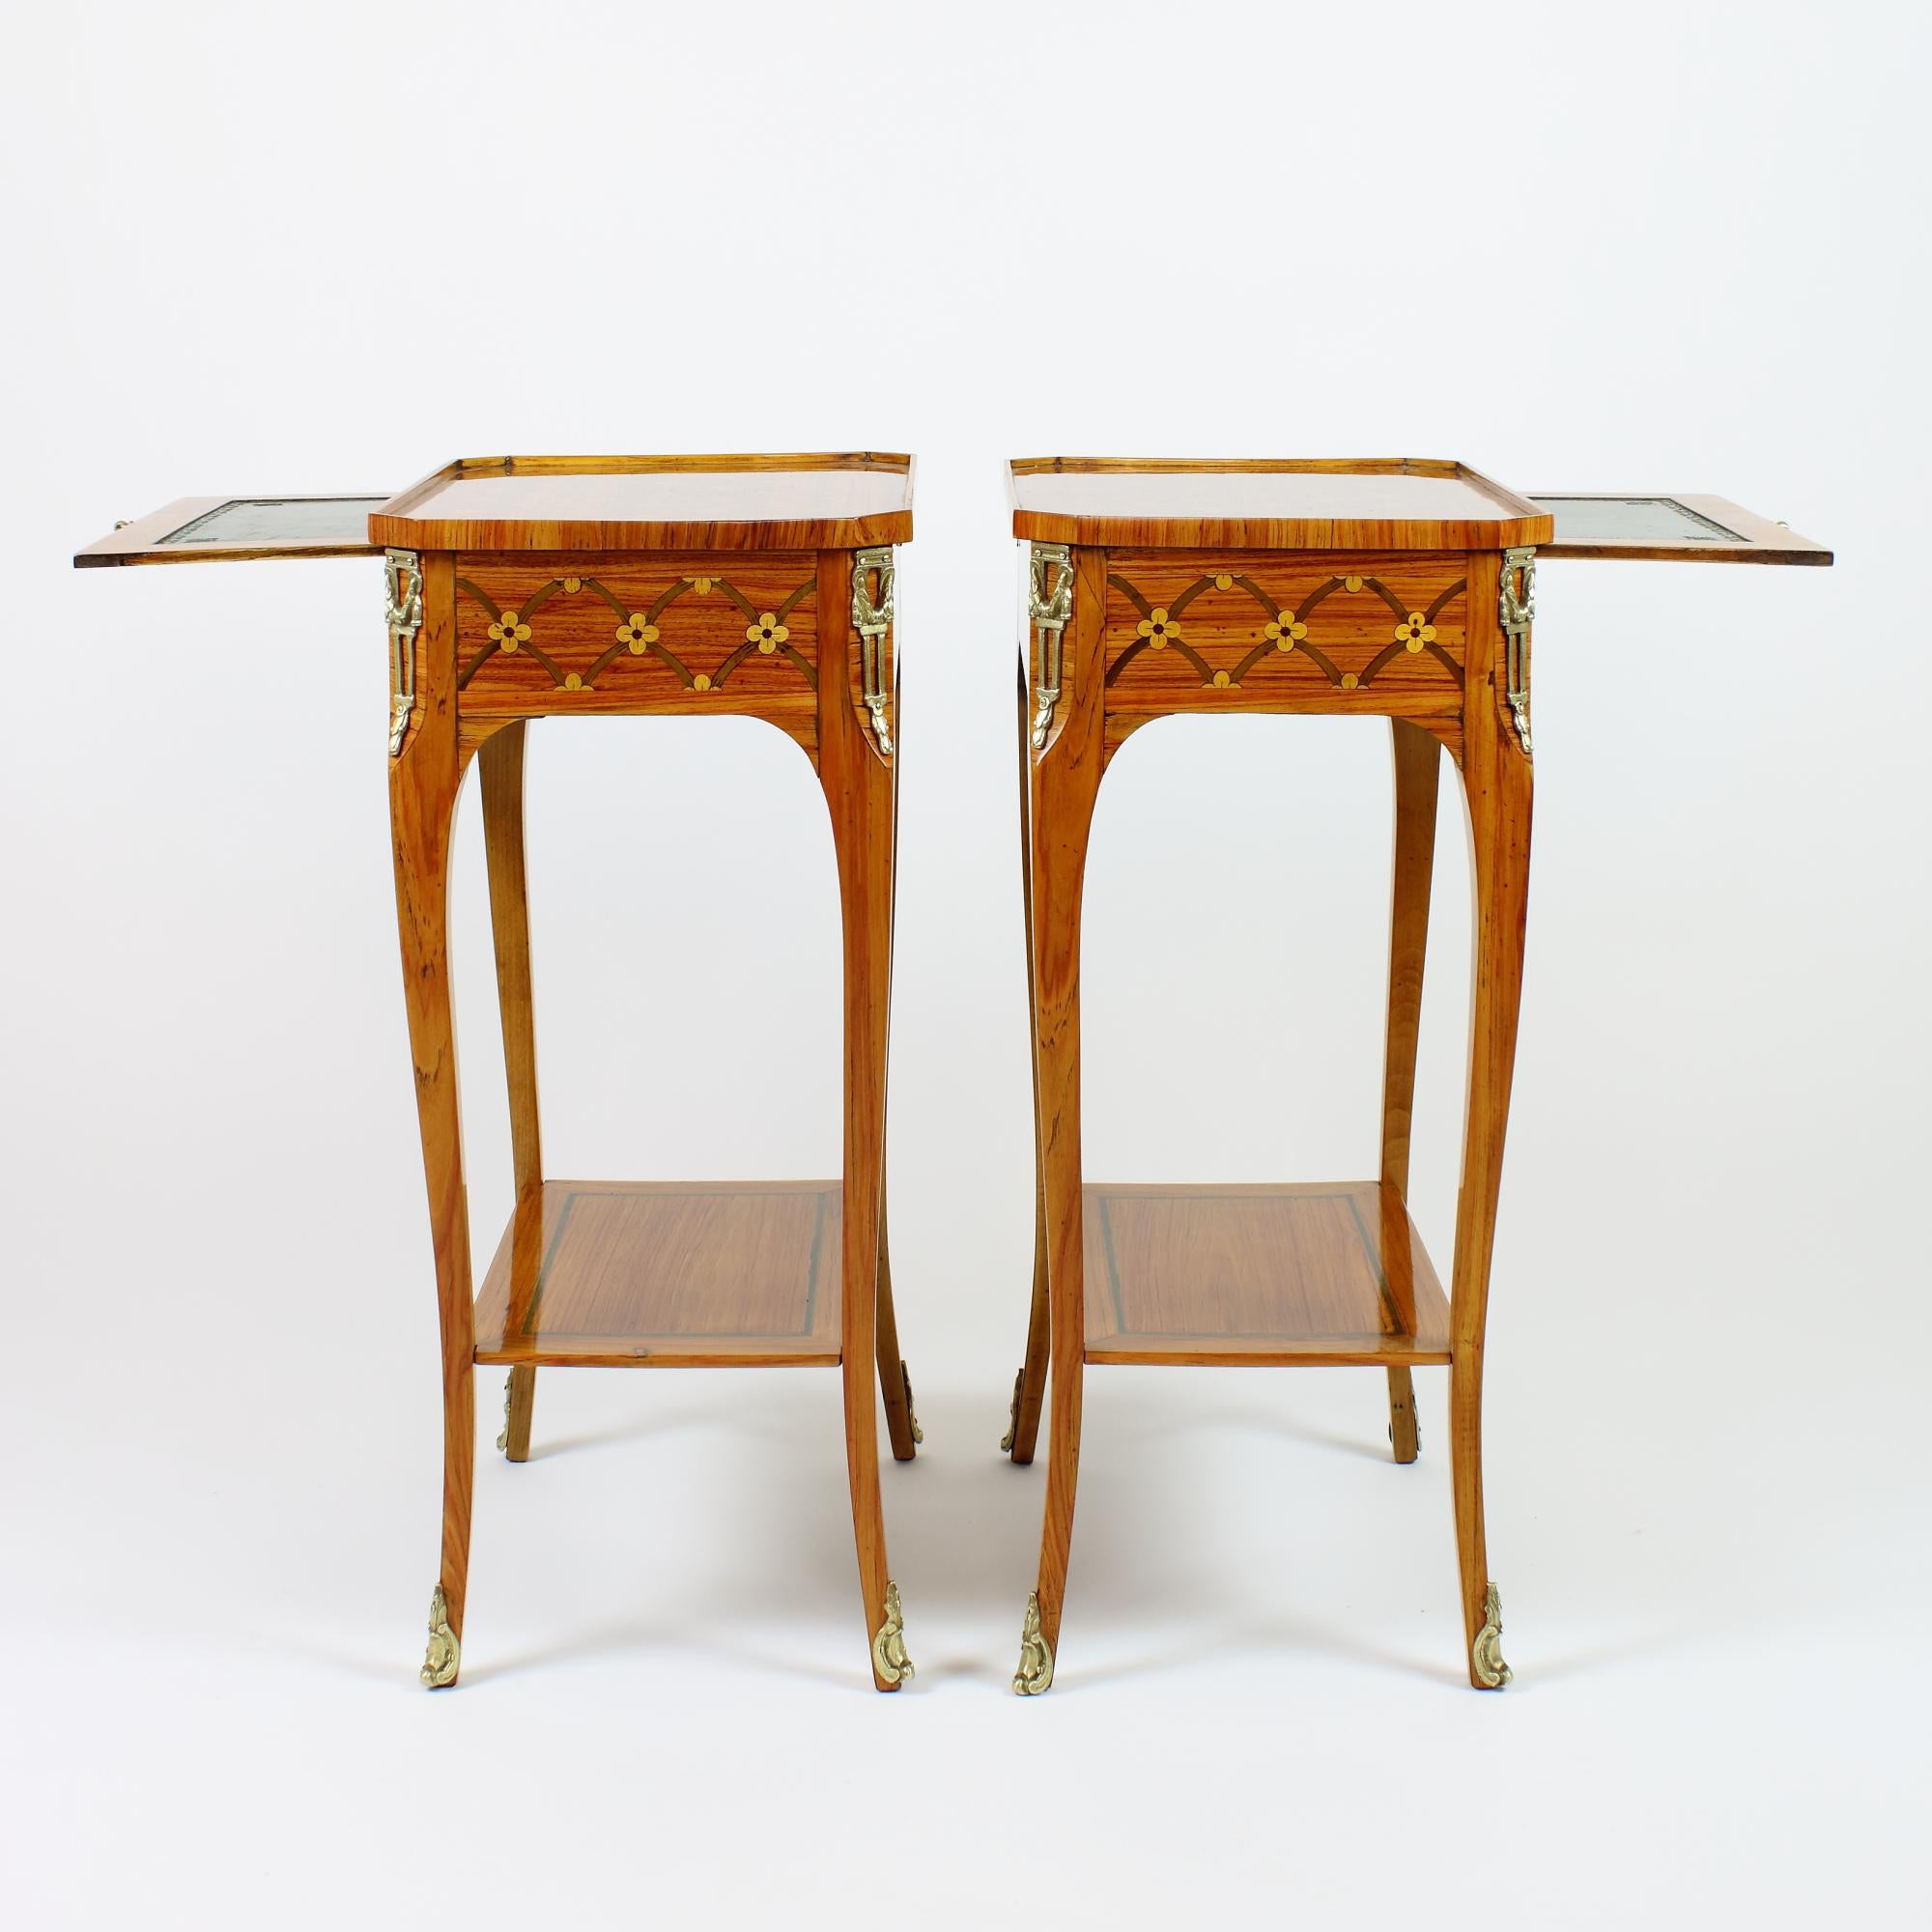 Late 19th Century Pair of 19th/20th Century Louis XVI Marquetry Side Tables /Lady's Writing Tables